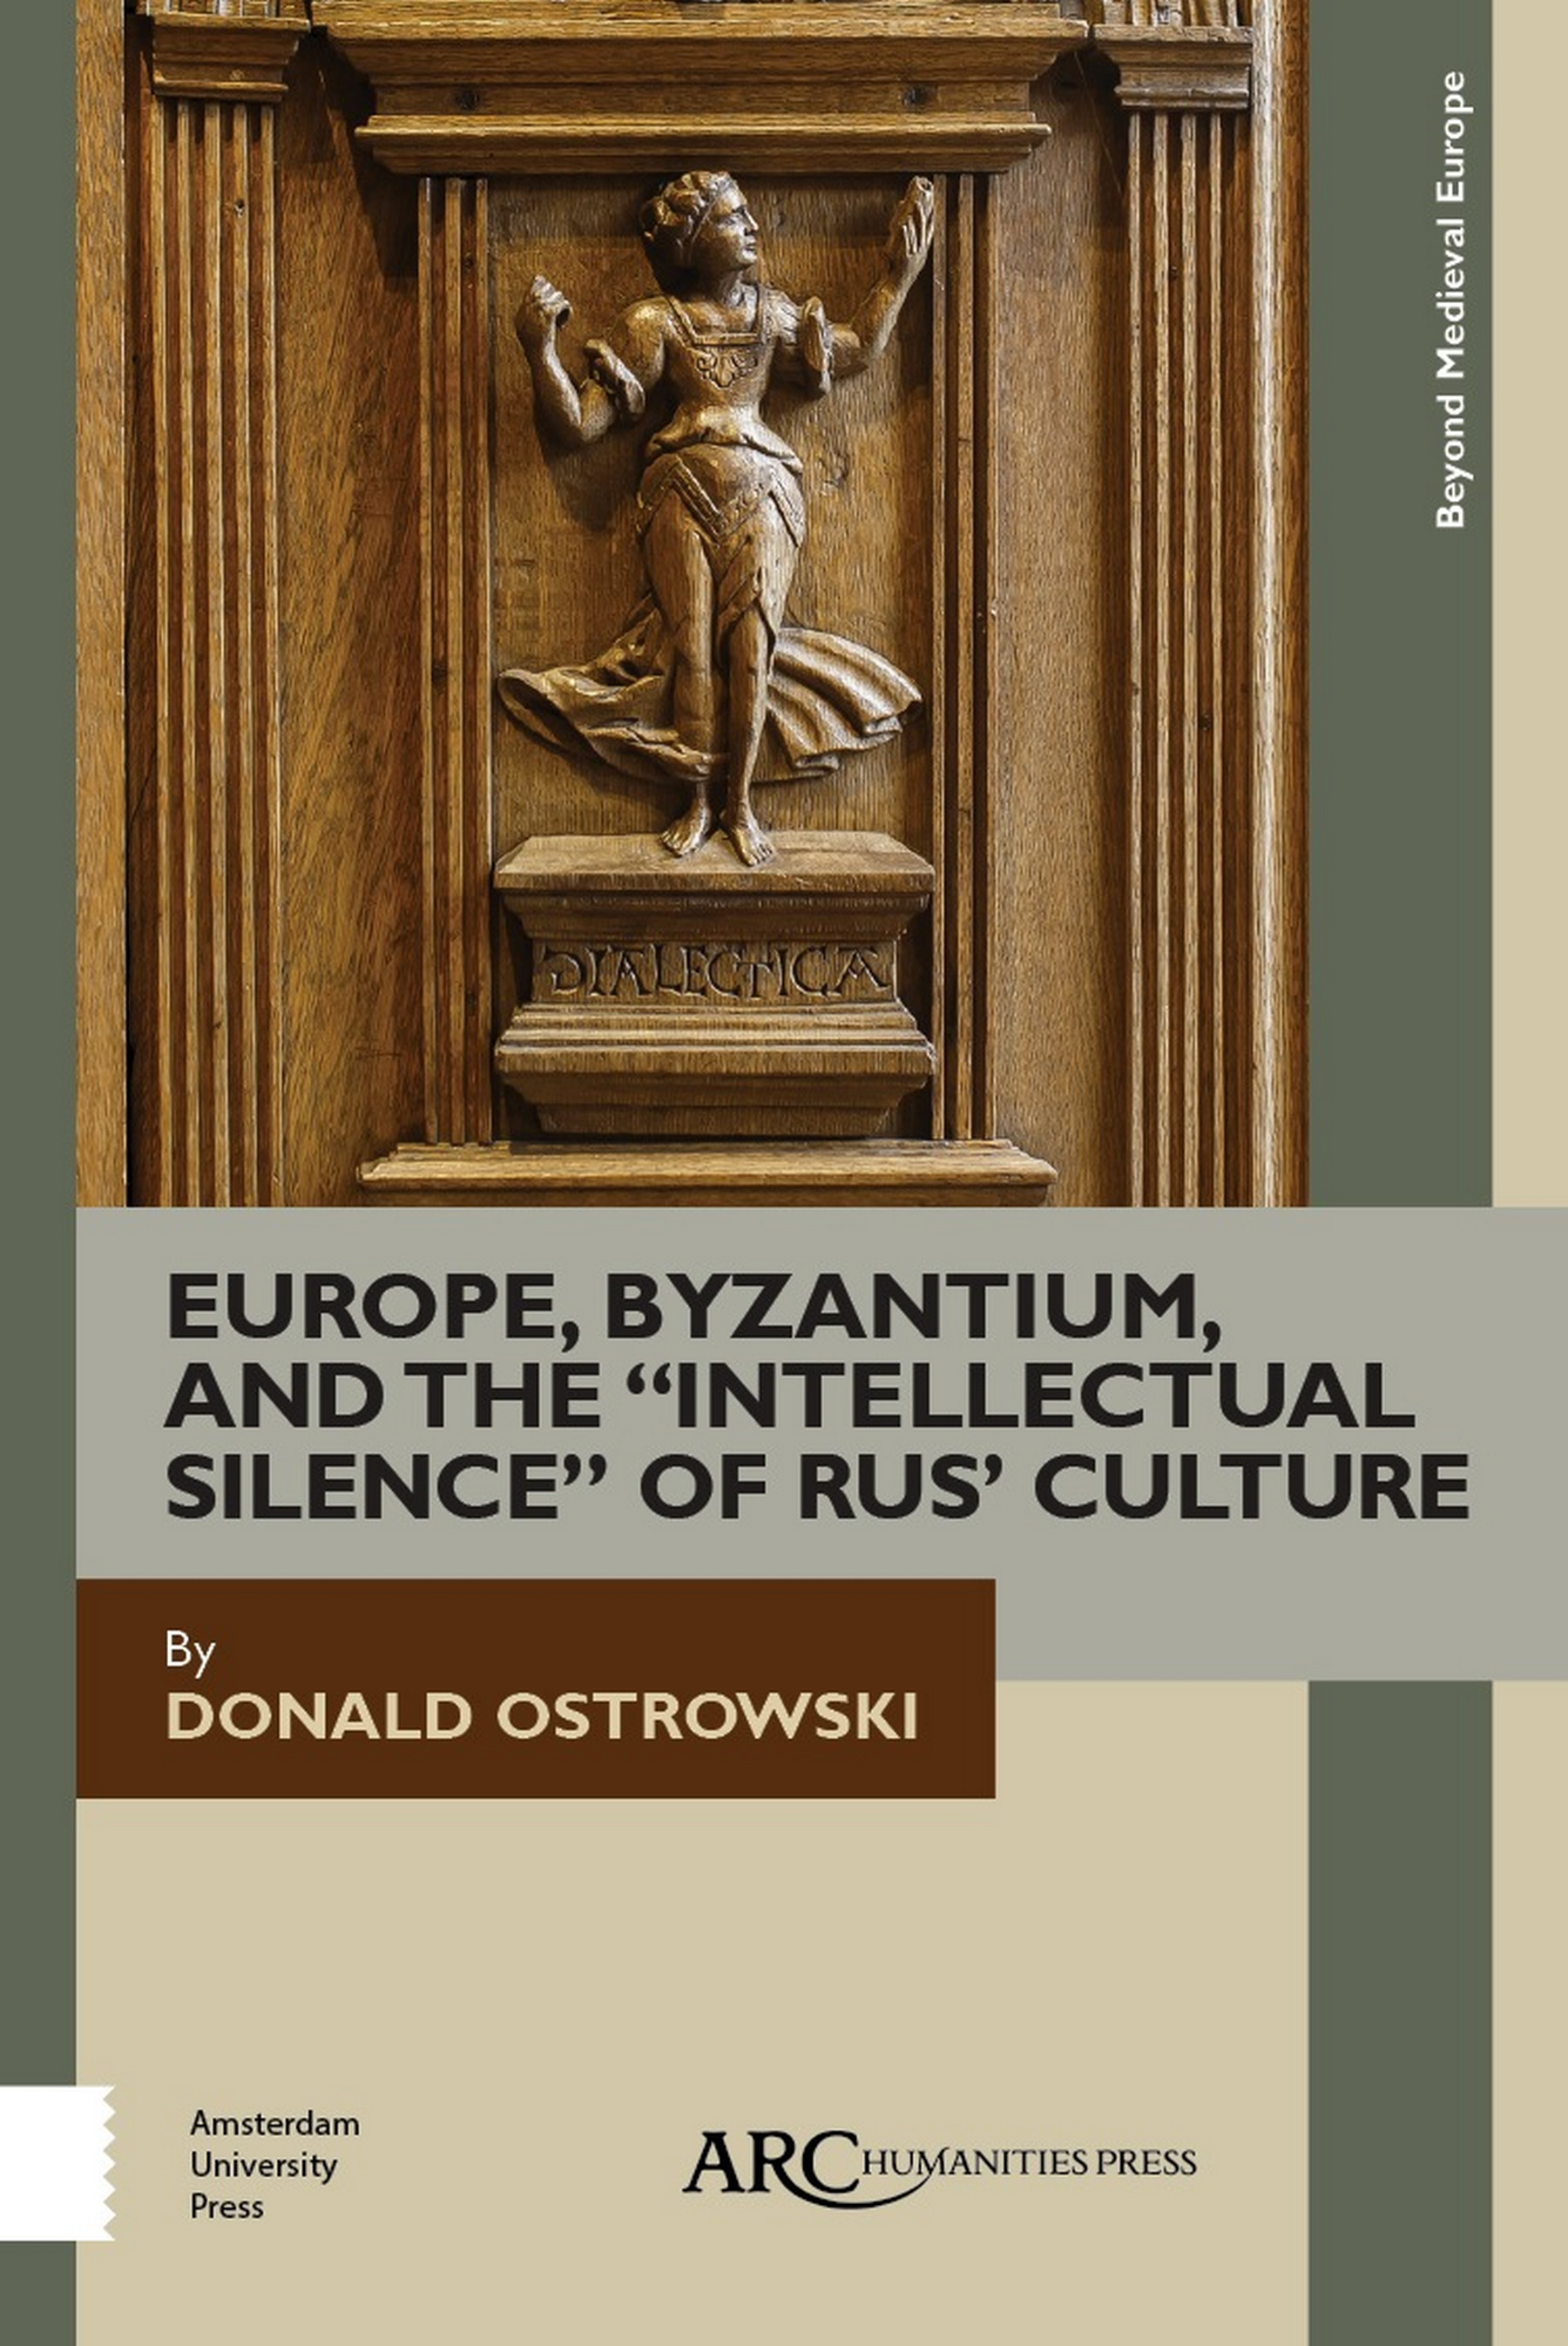 Europe, Byzantium, and the &quote;Intellectual Silence&quote; of Rus' Culture